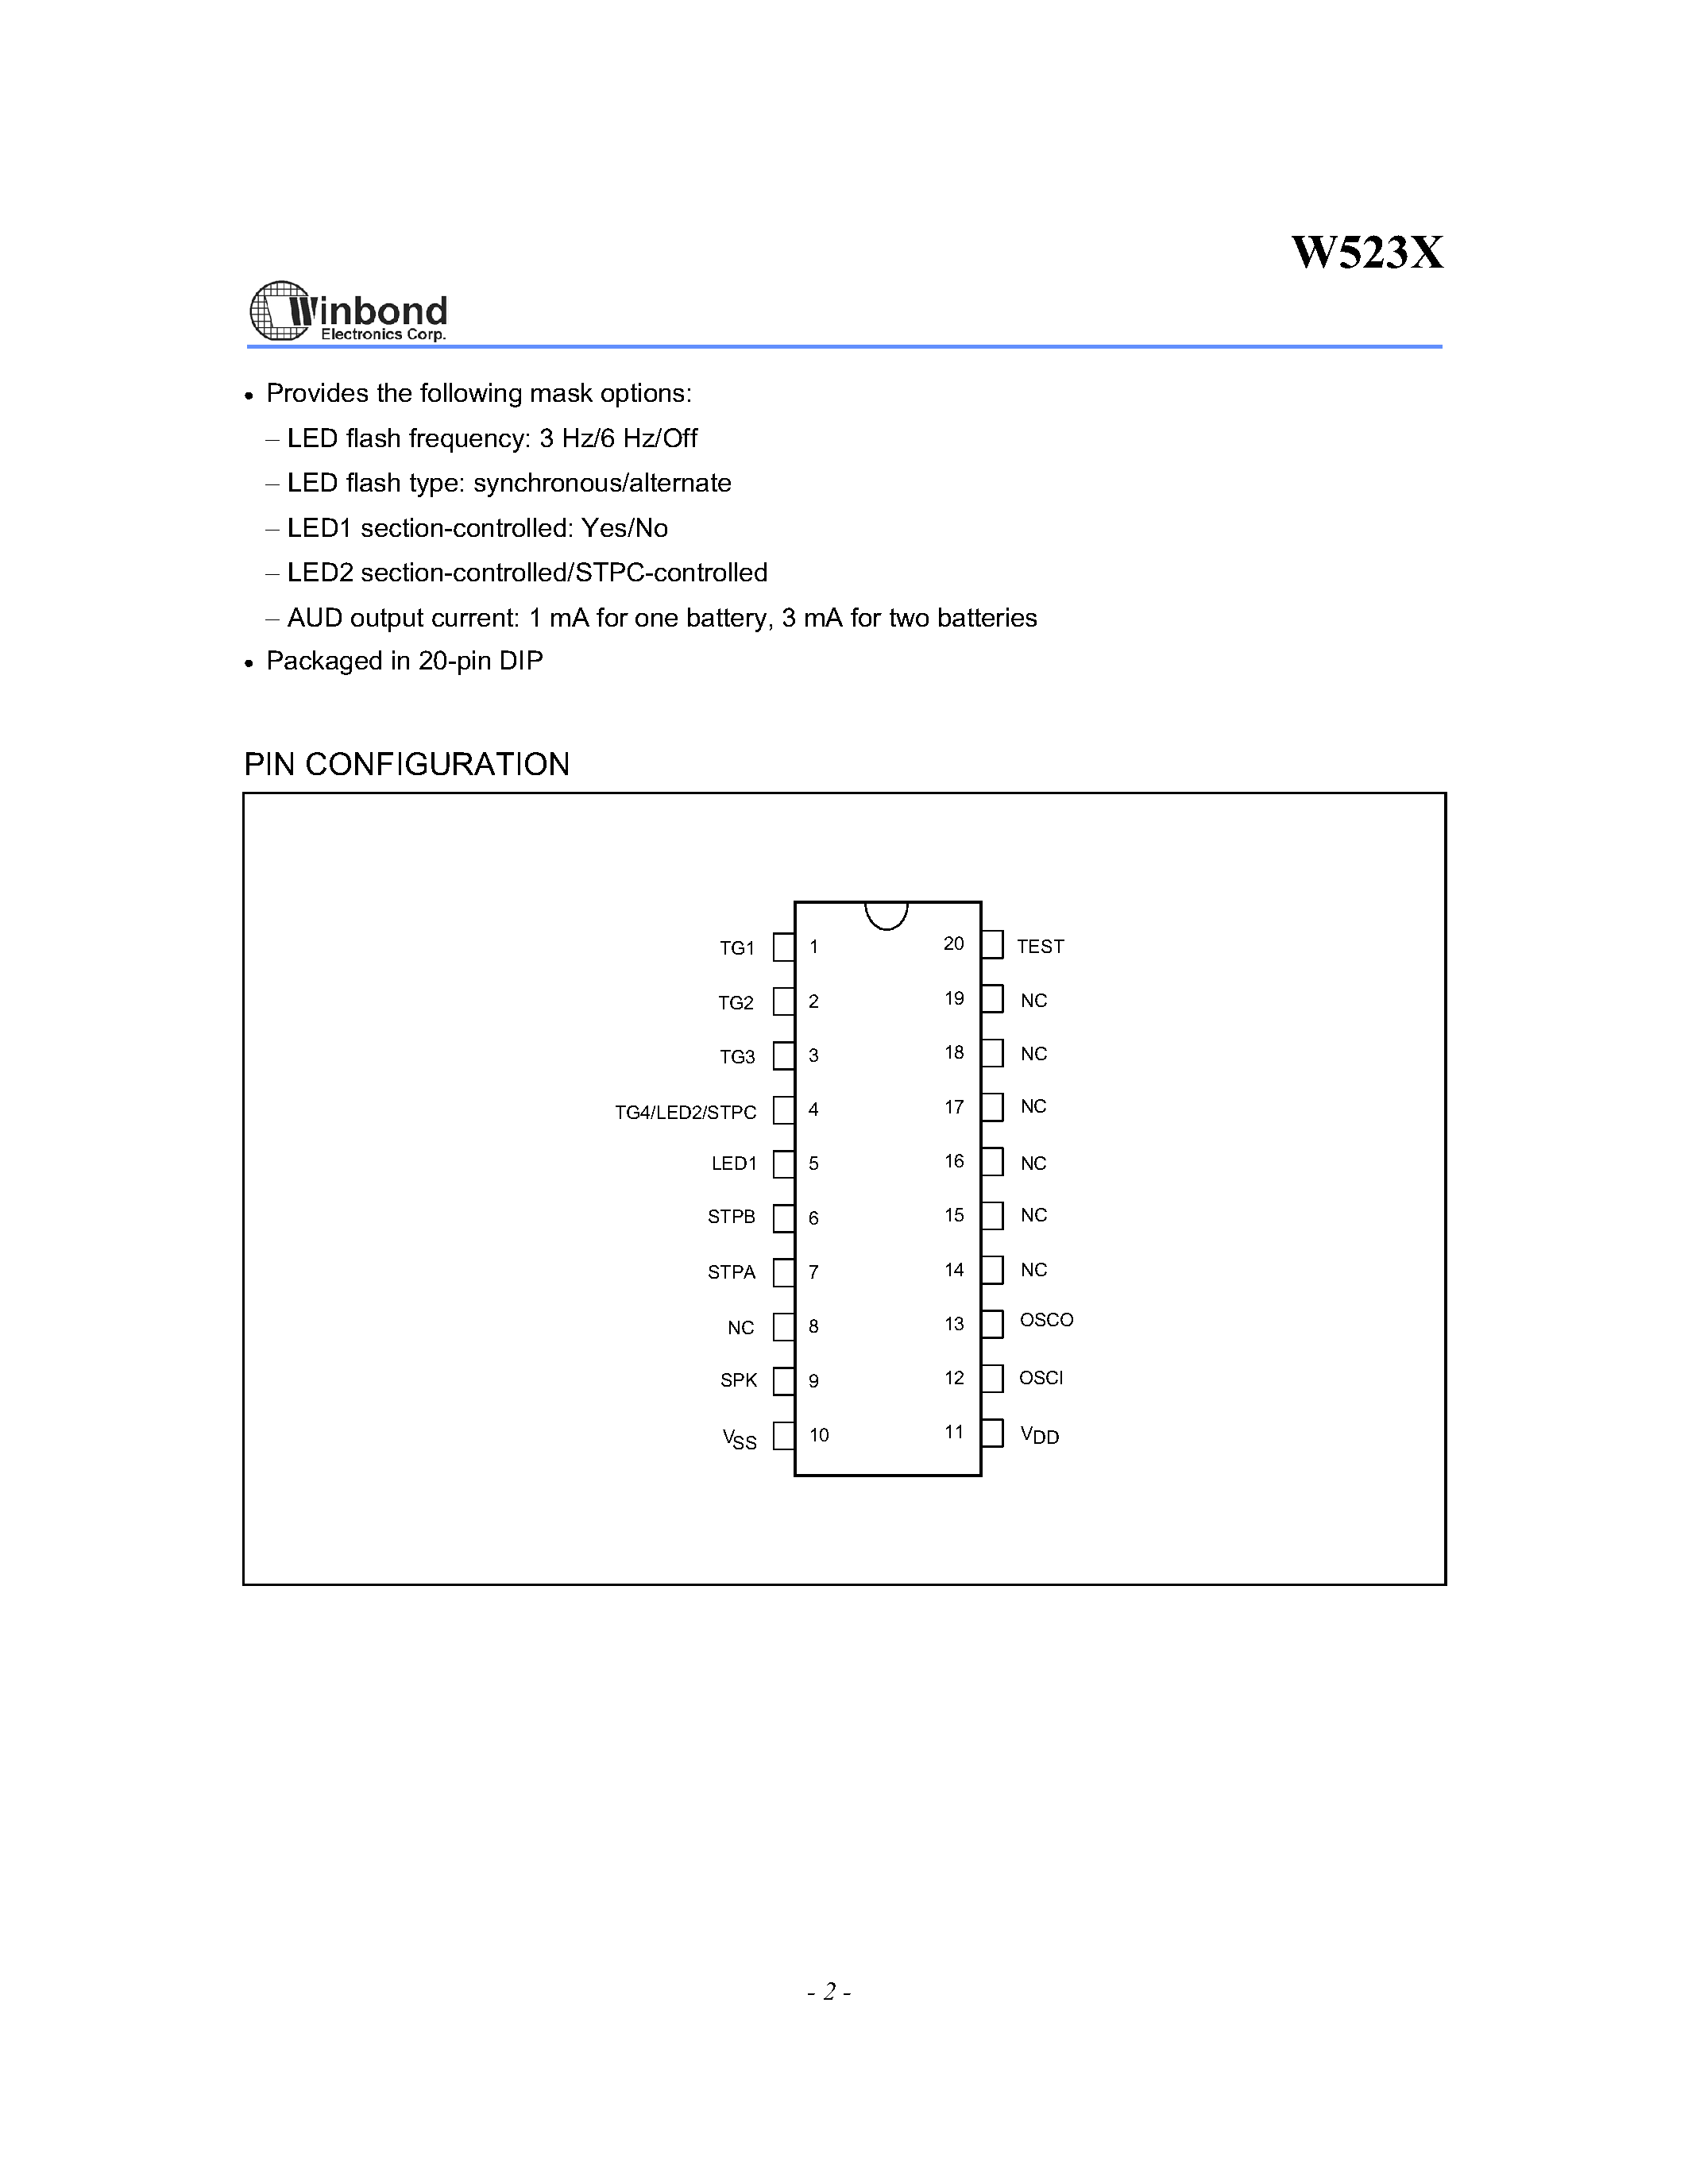 Datasheet W523x - Power Speech LOW VOLTAGE ADPCM VOICE SYNTHESIZER page 2